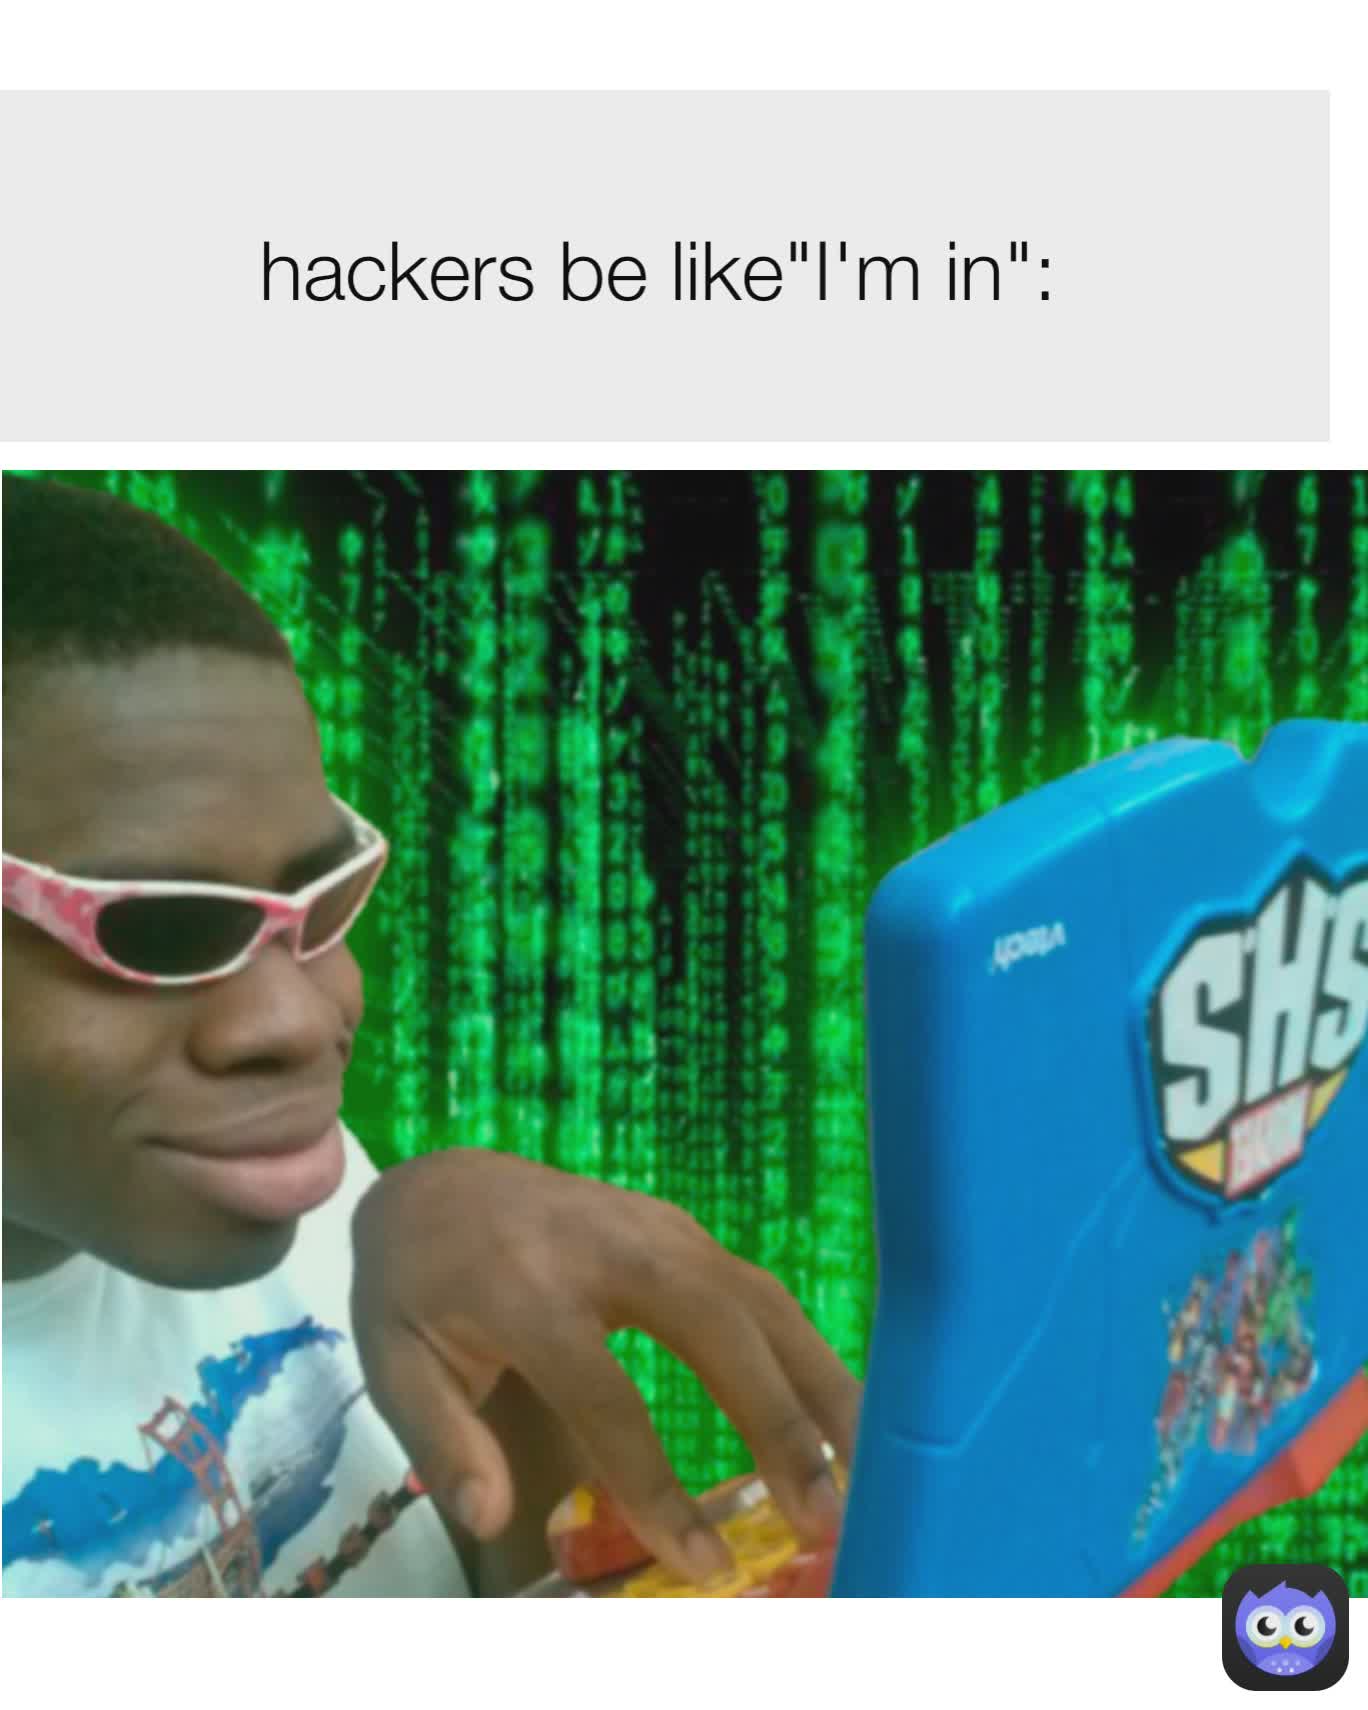 hackers be like"I'm in":